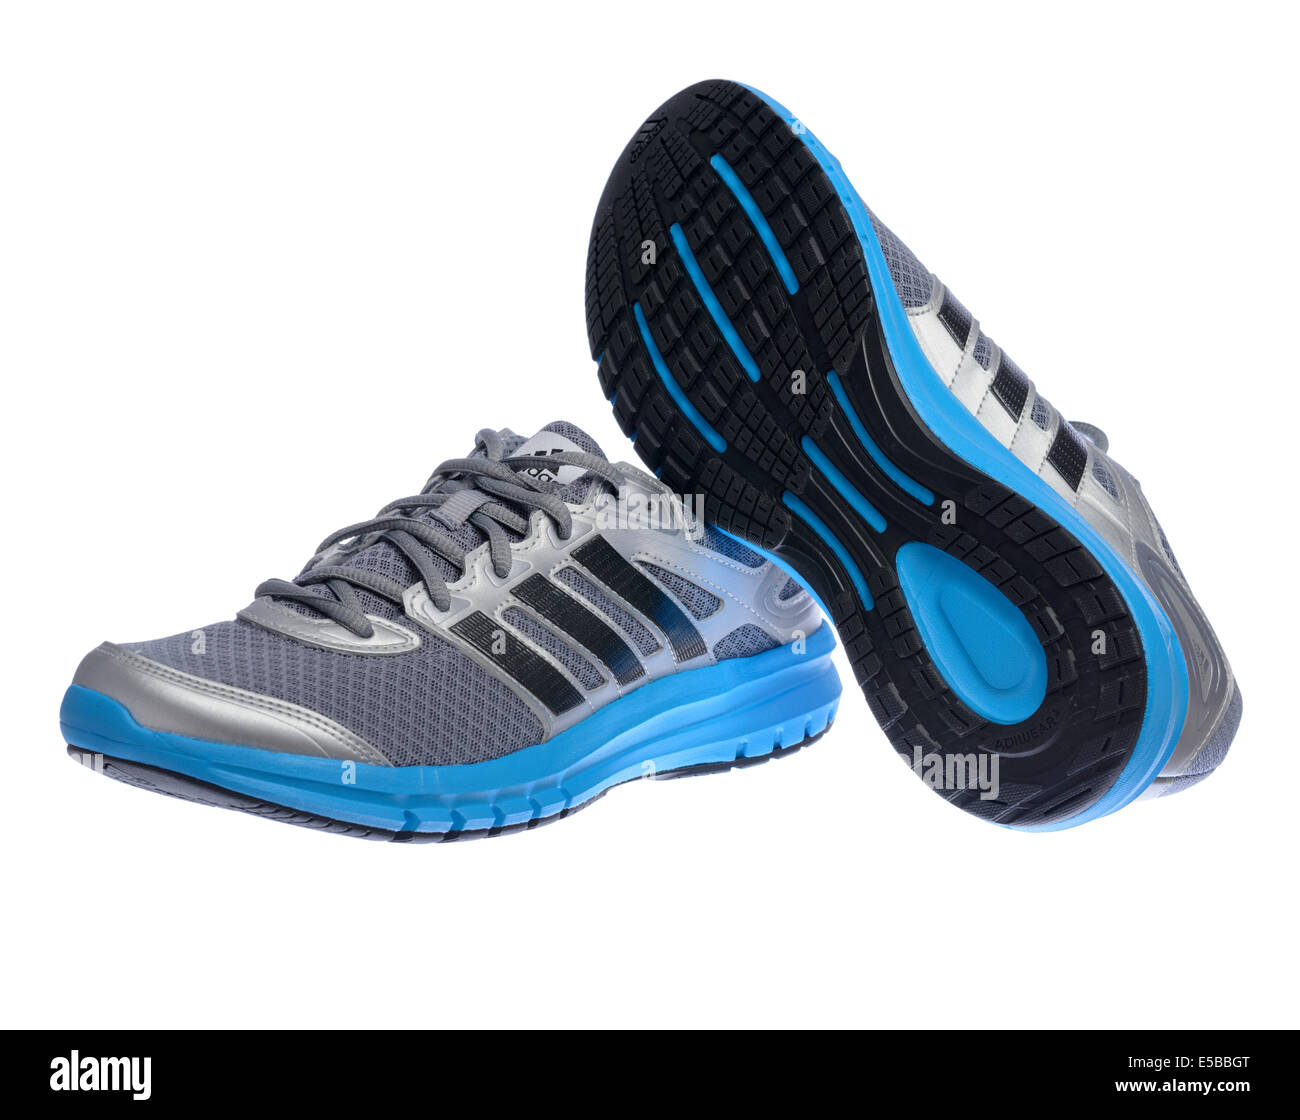 Silver and blue Adidas running shoes Stock Photo